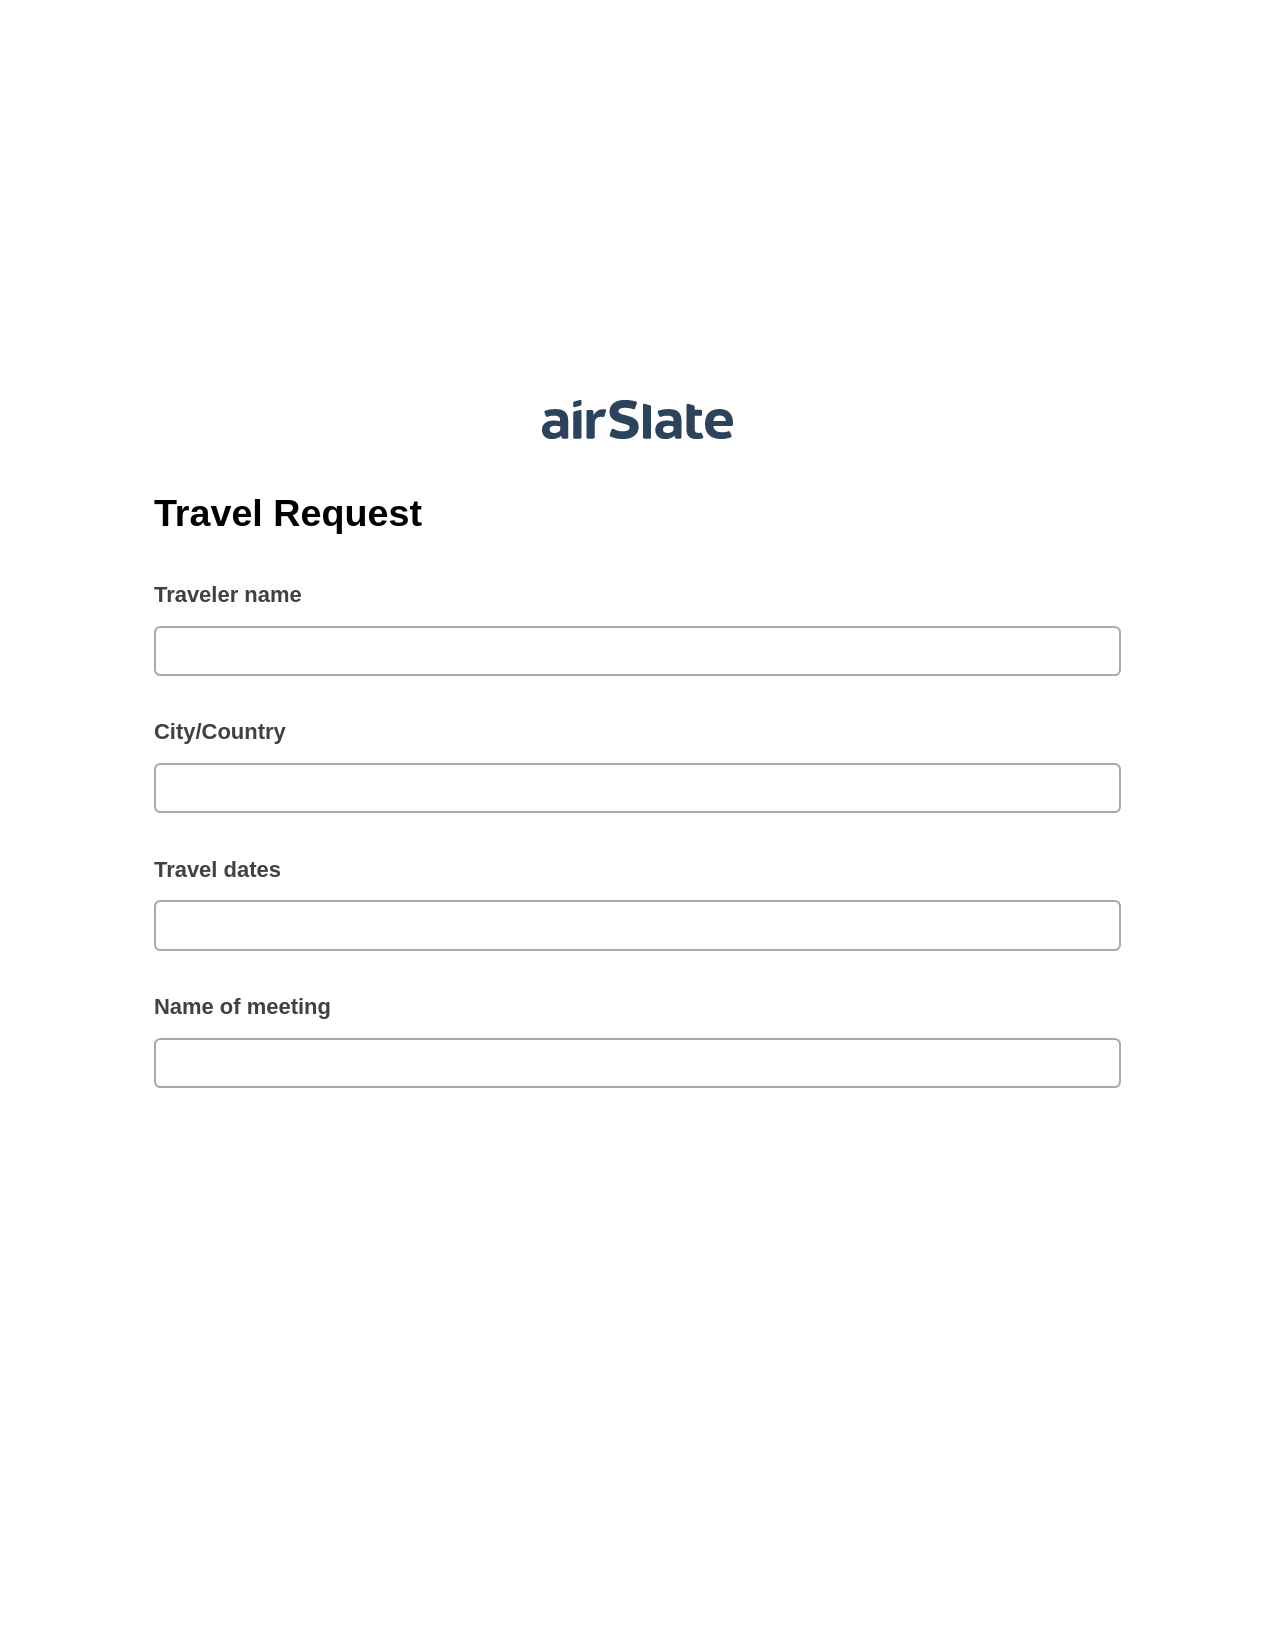 Travel Request Pre-fill from Salesforce Records with SOQL Bot, Create slate addon, Export to Smartsheet